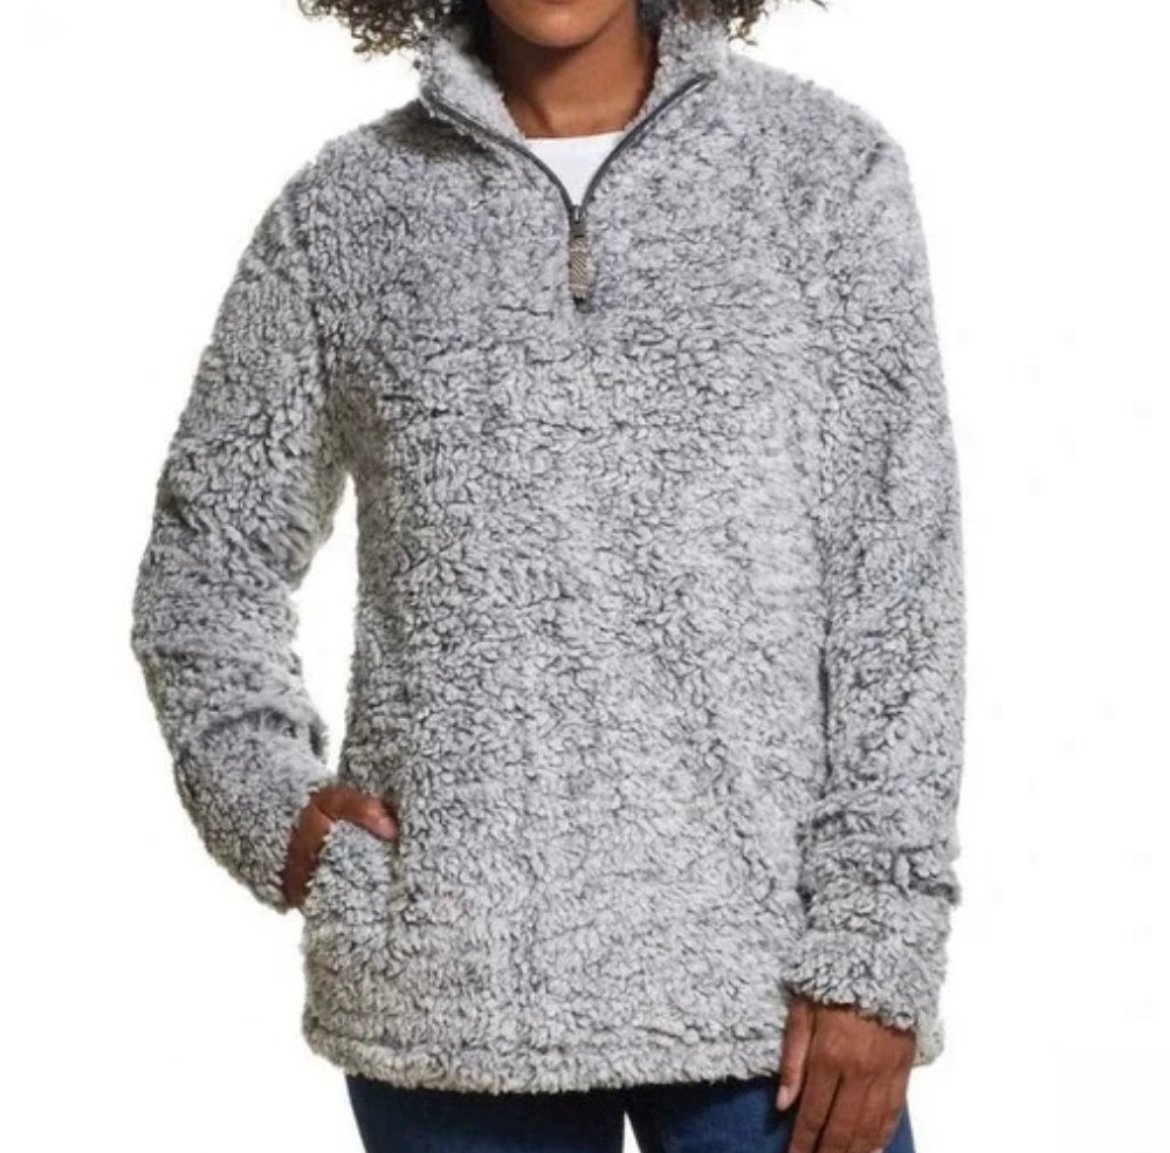 the Lowest price Weatherproof Sherpa Pullover w/ Pockets Lined 1/4 Zip Gray Large GDSxrtdHF Low Price